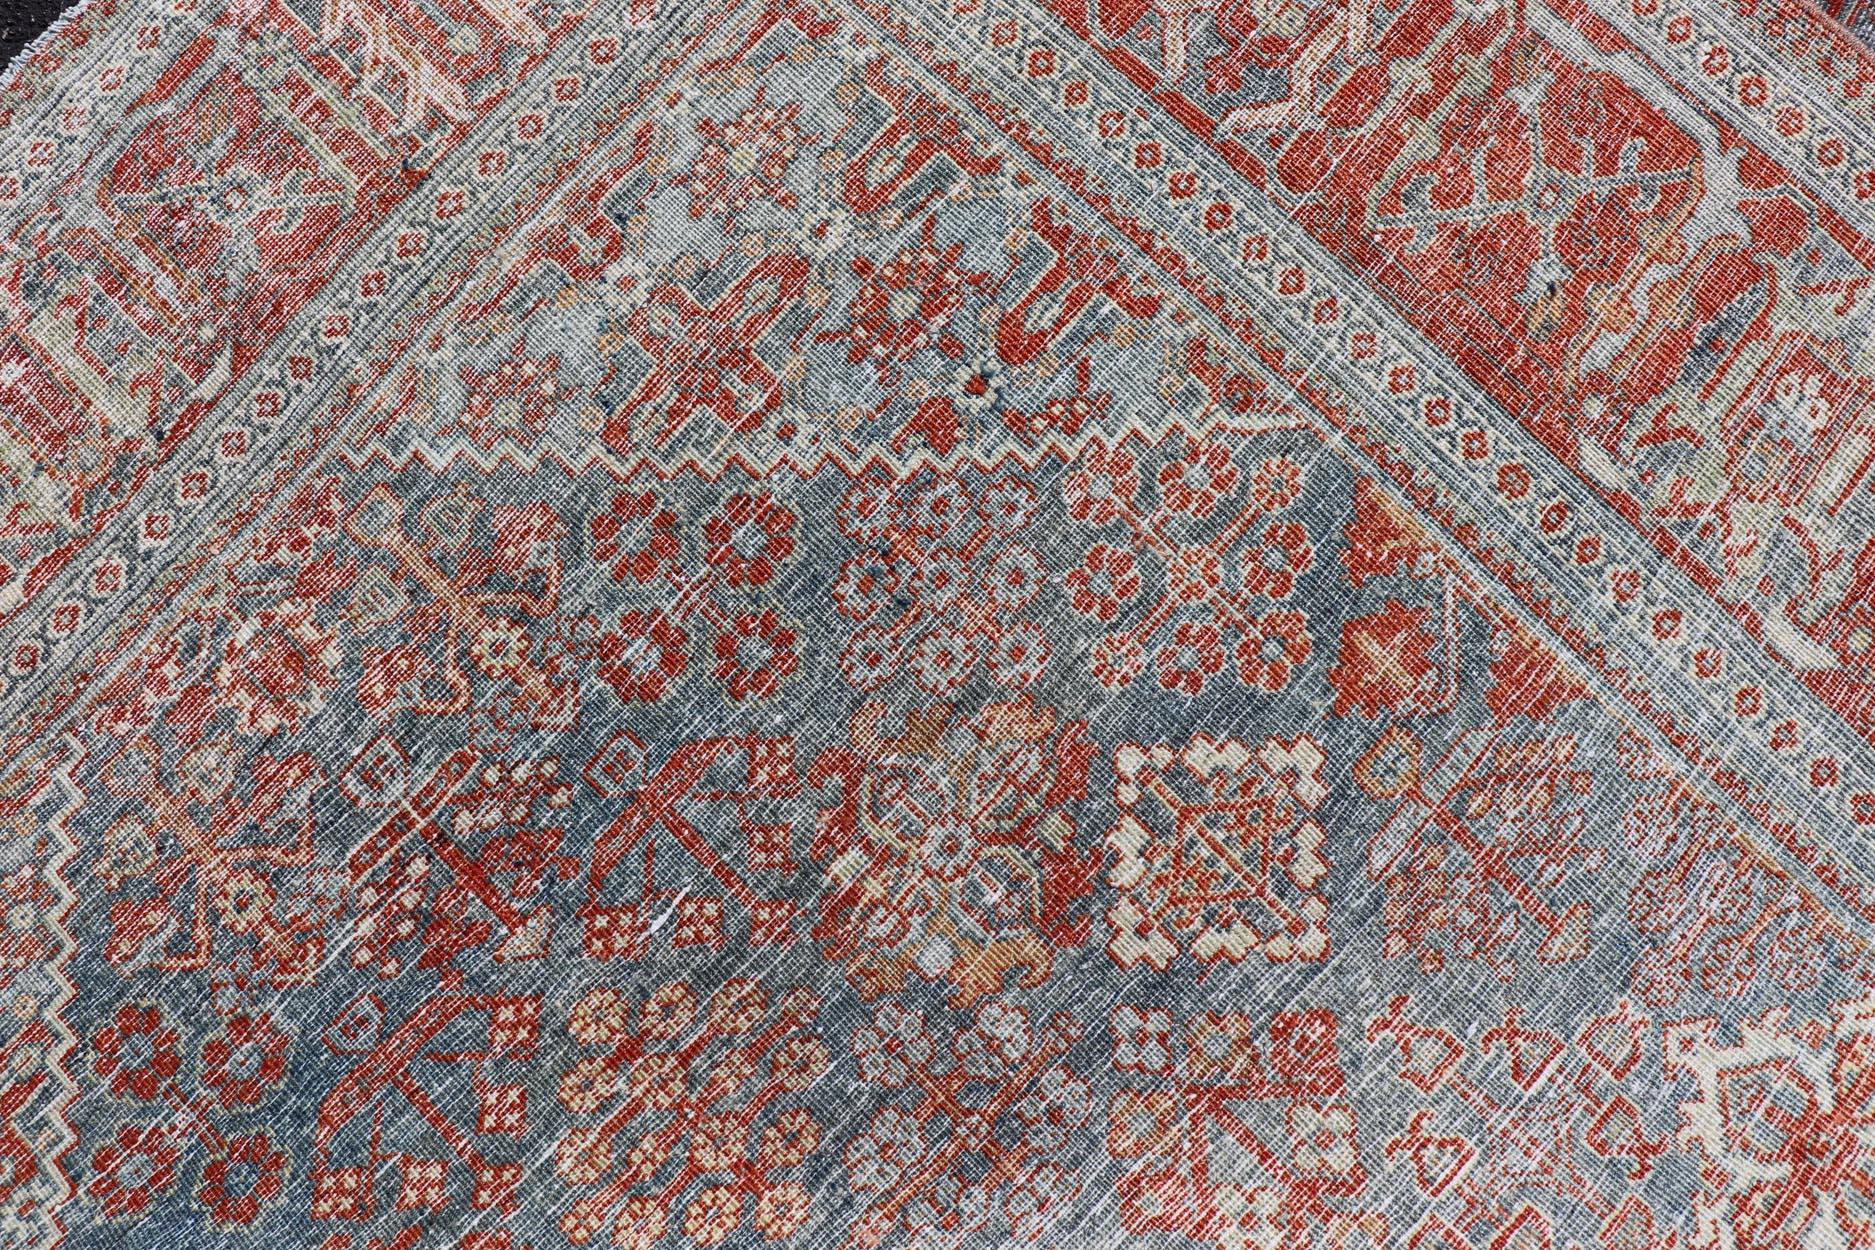 Antique Persian Joshaghan Gallery Rug with All-Over Sub-Geometric Diamond Design For Sale 1